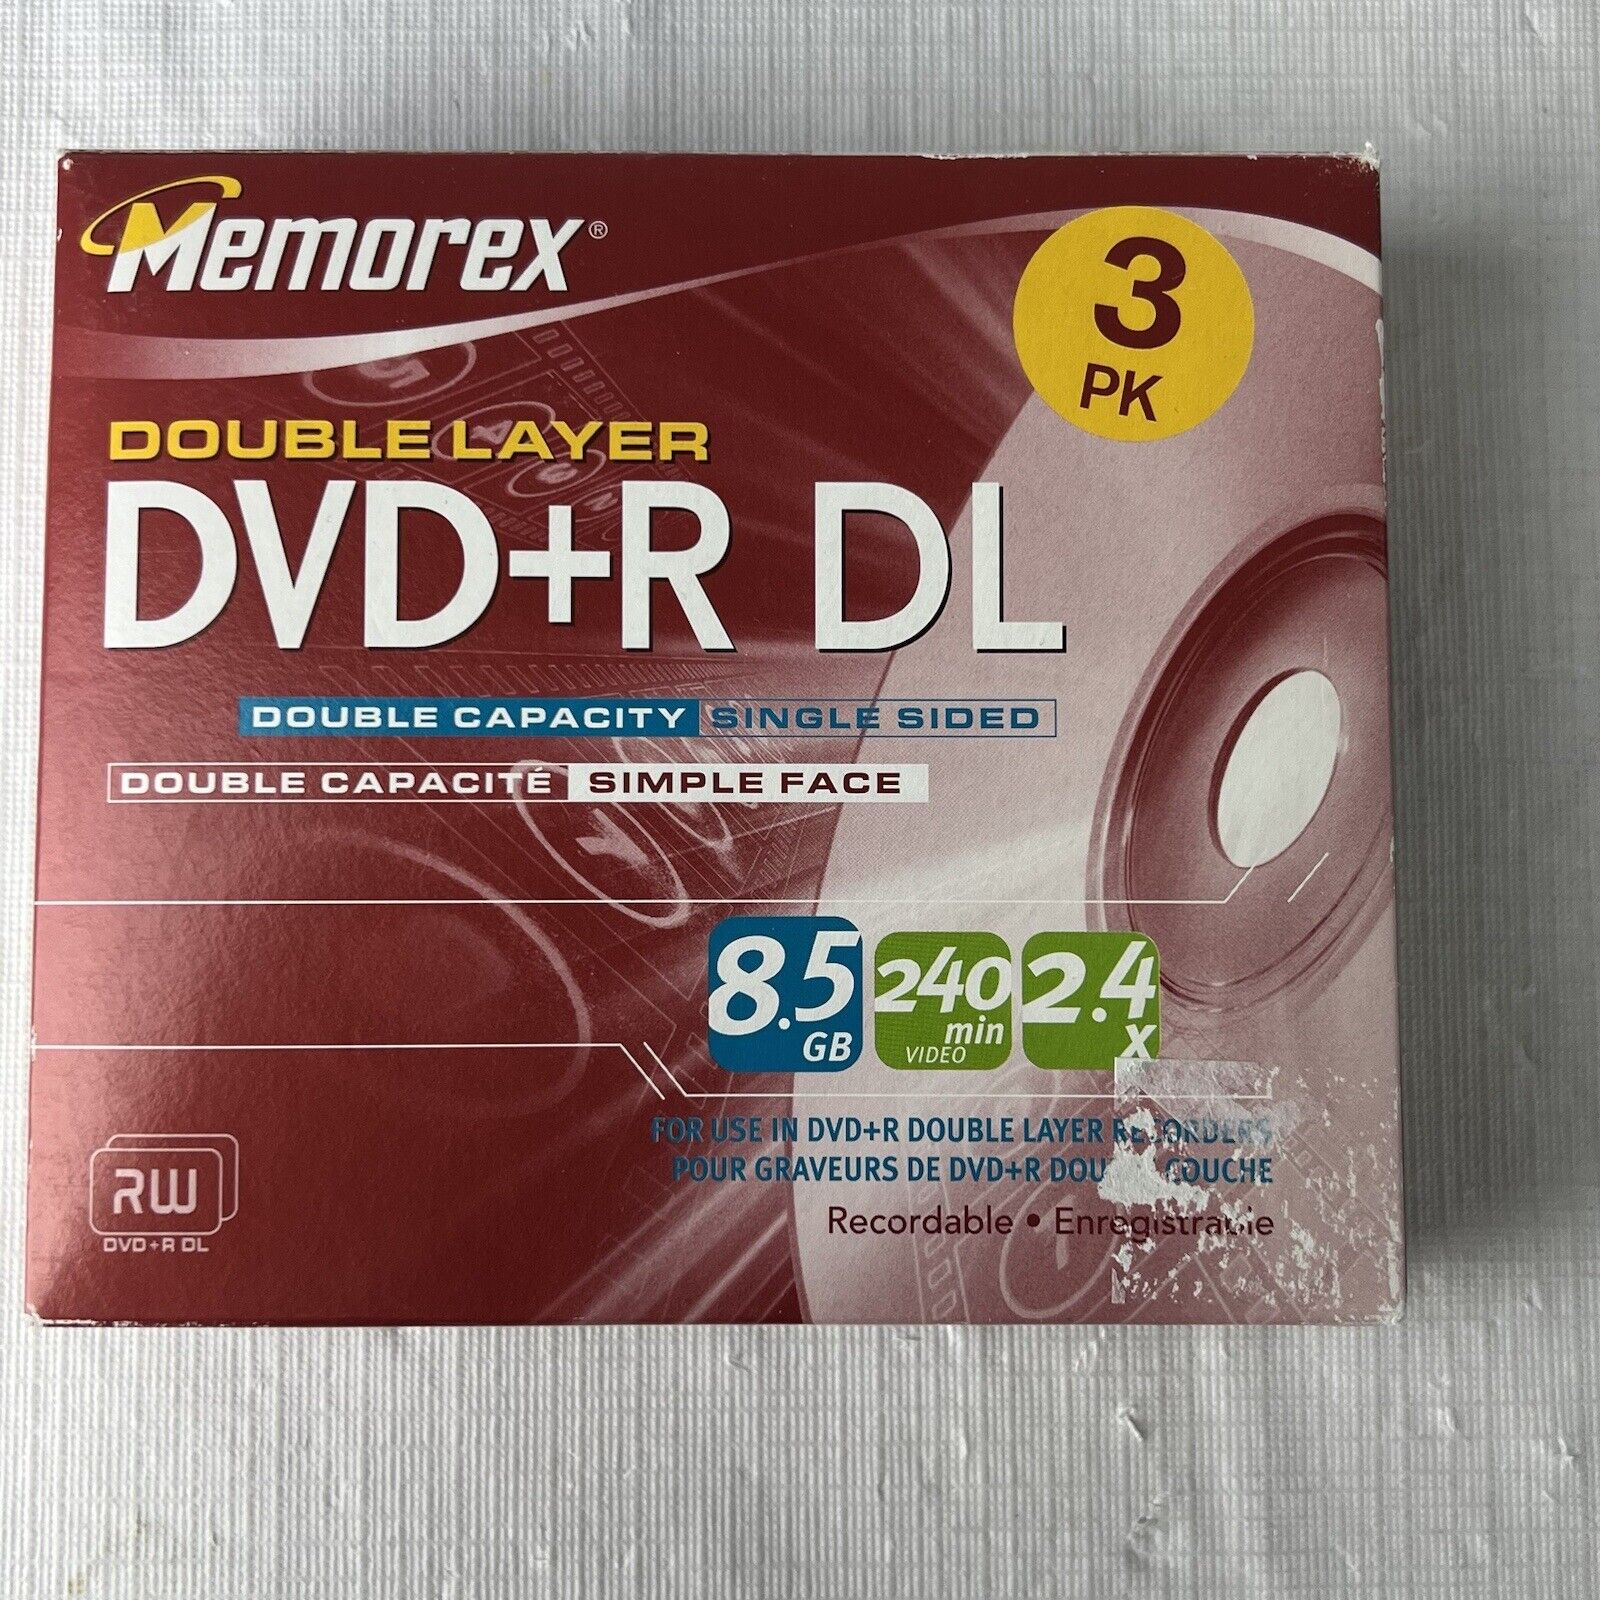 Memorex DVD+R DL 8.5 GB Double Layer Blank DVD 3 Pack New Factory Sealed Discs